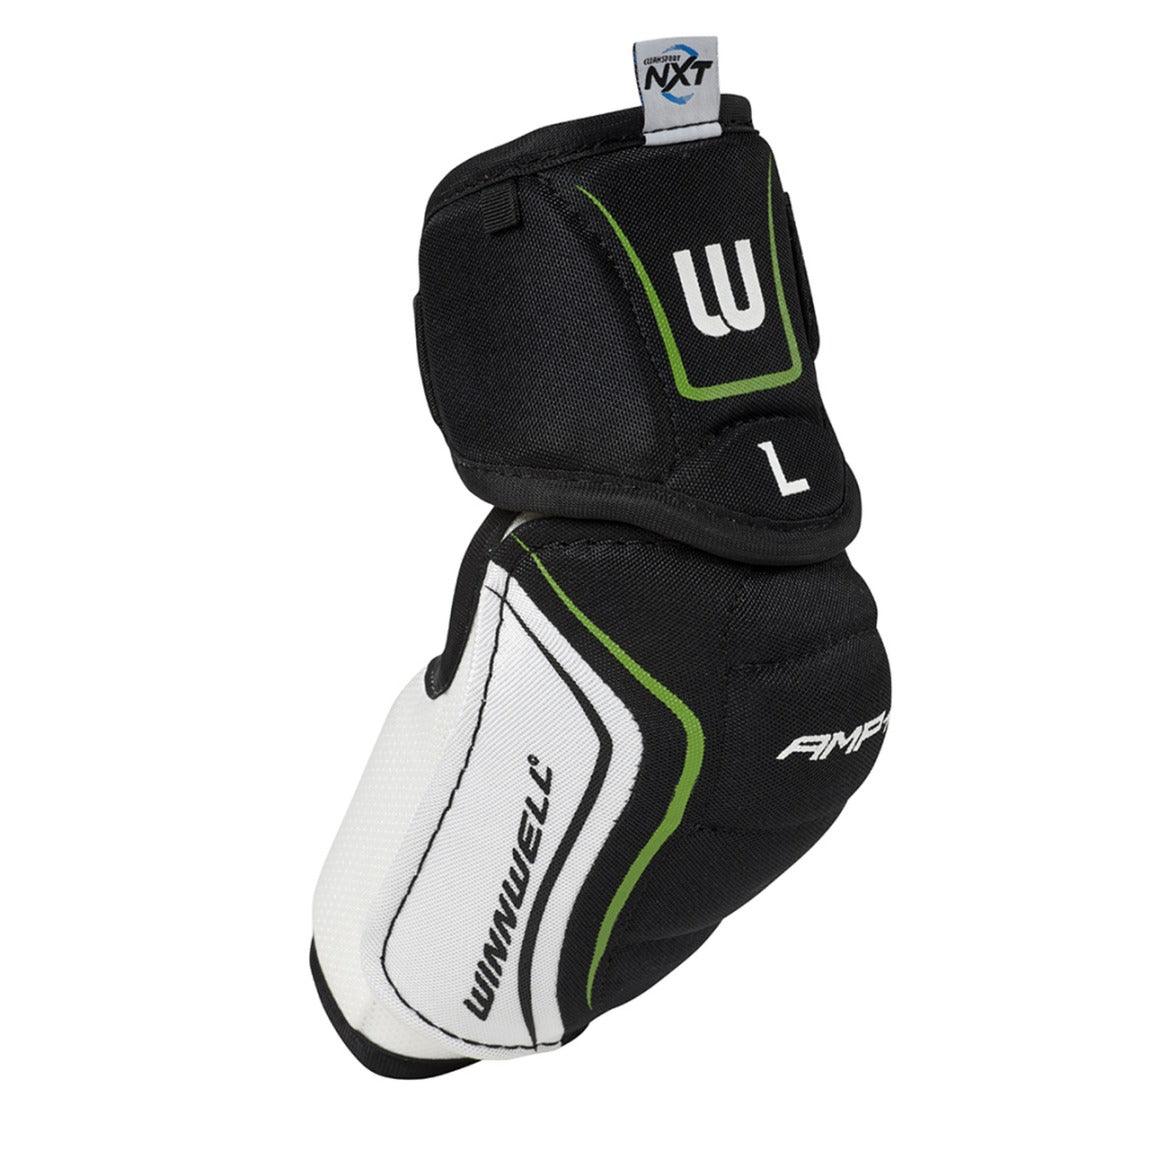 AMP700 Elbow Pad - Senior - Sports Excellence